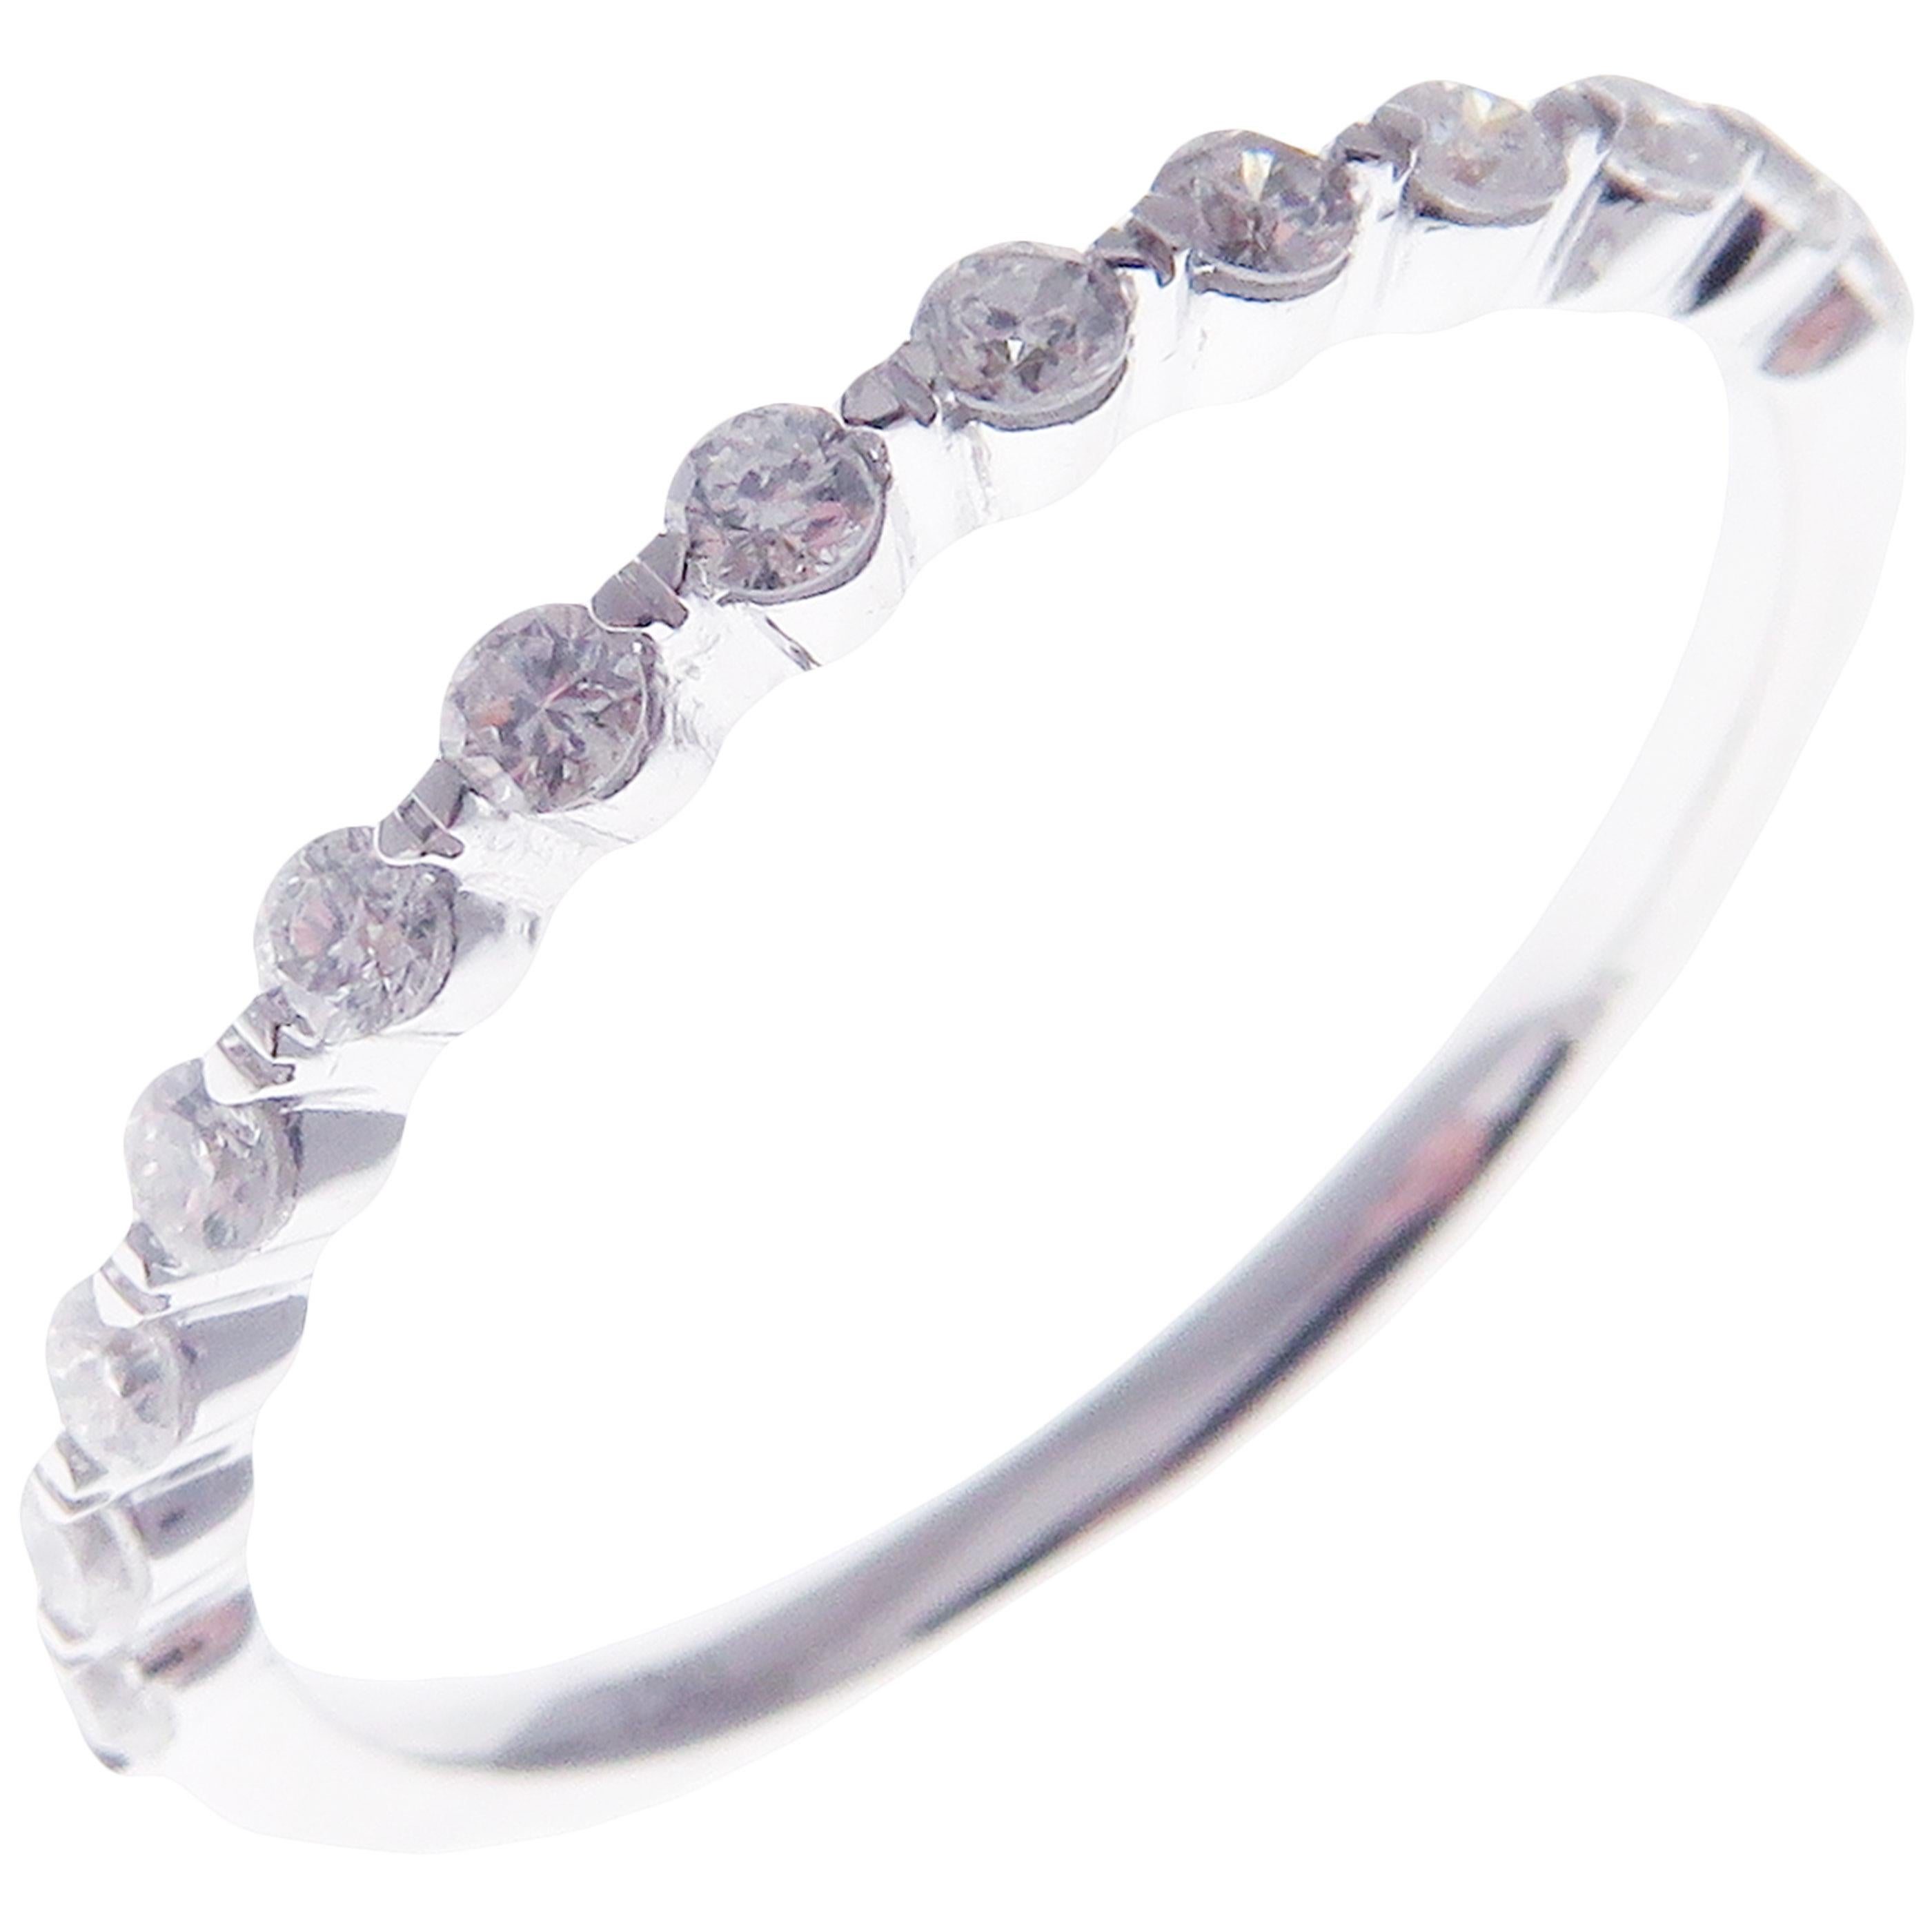 This simple stackable ring is crafted in 18-karat white gold, featuring 13 round white diamonds totaling of 0.28 carats.
Approximate total weight 1.47 grams.
Standard Ring size 7
SI-G Quality natural white diamonds.